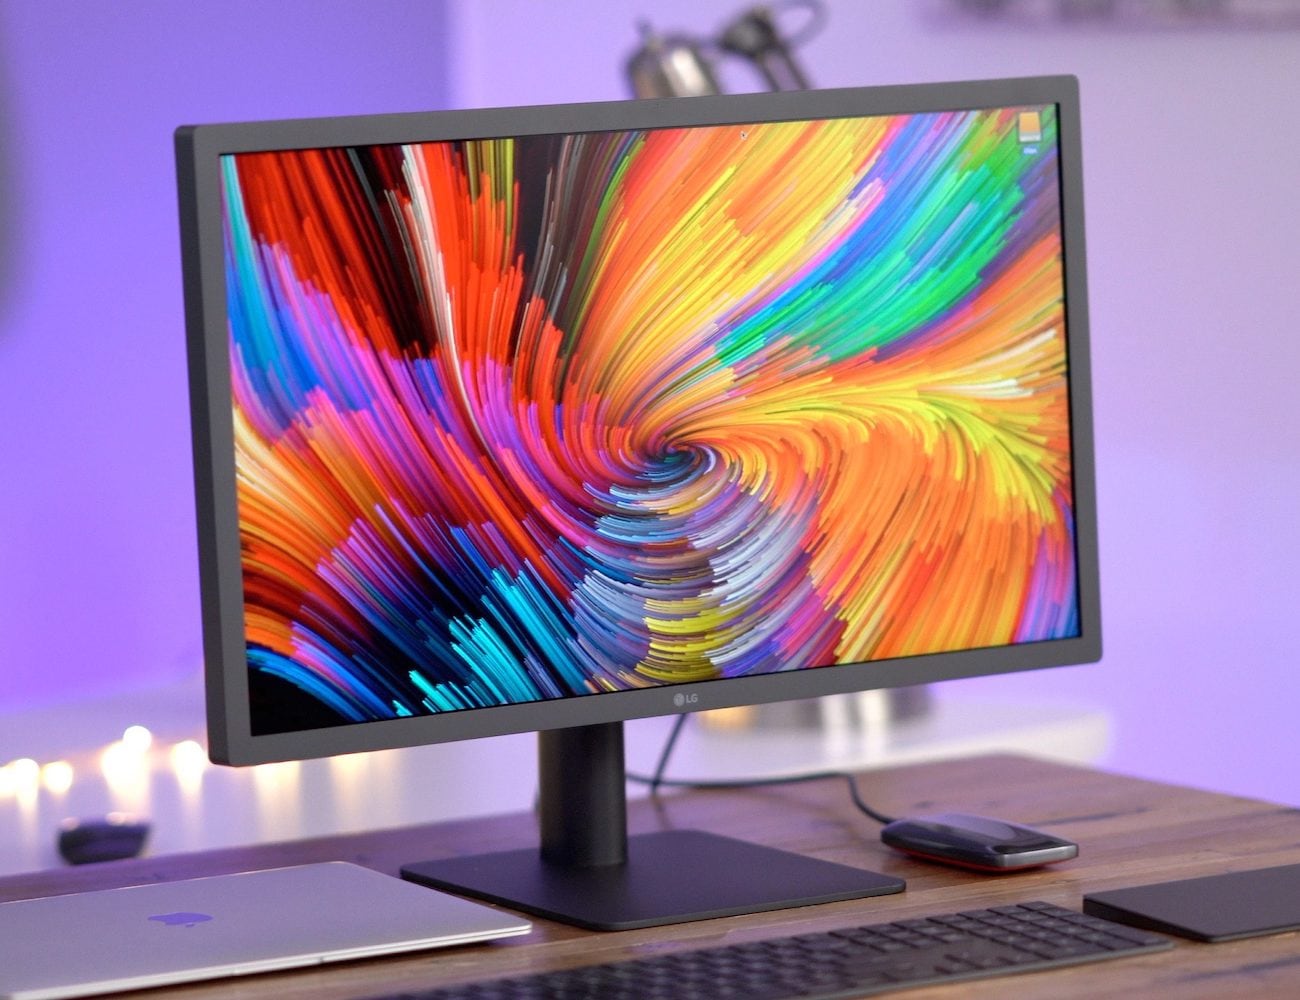 LG UltraFine 4K Display High-Performance Computer Monitor ensures you see every minute detail